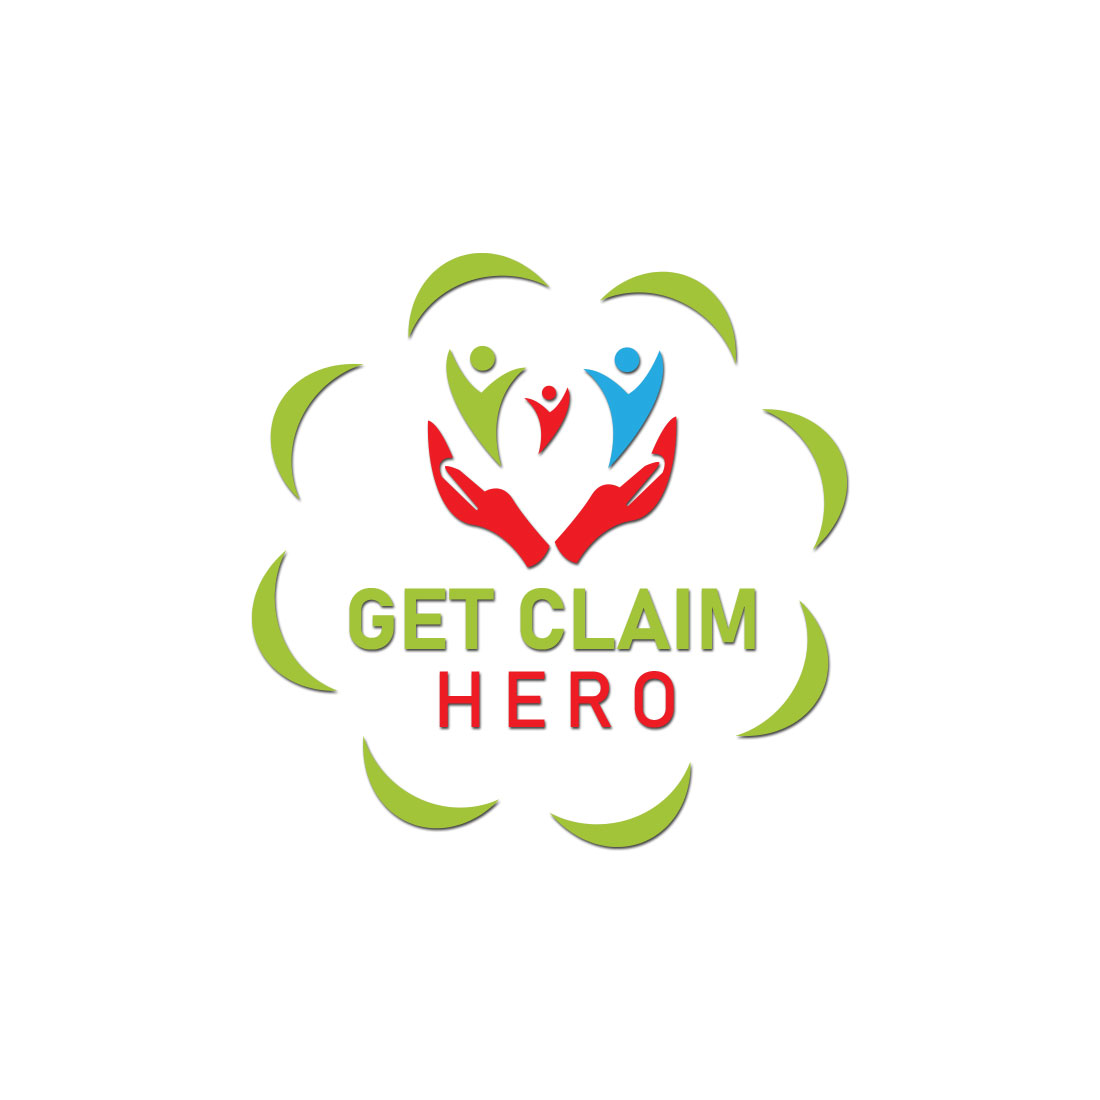 GET CLAIM HERO preview image.